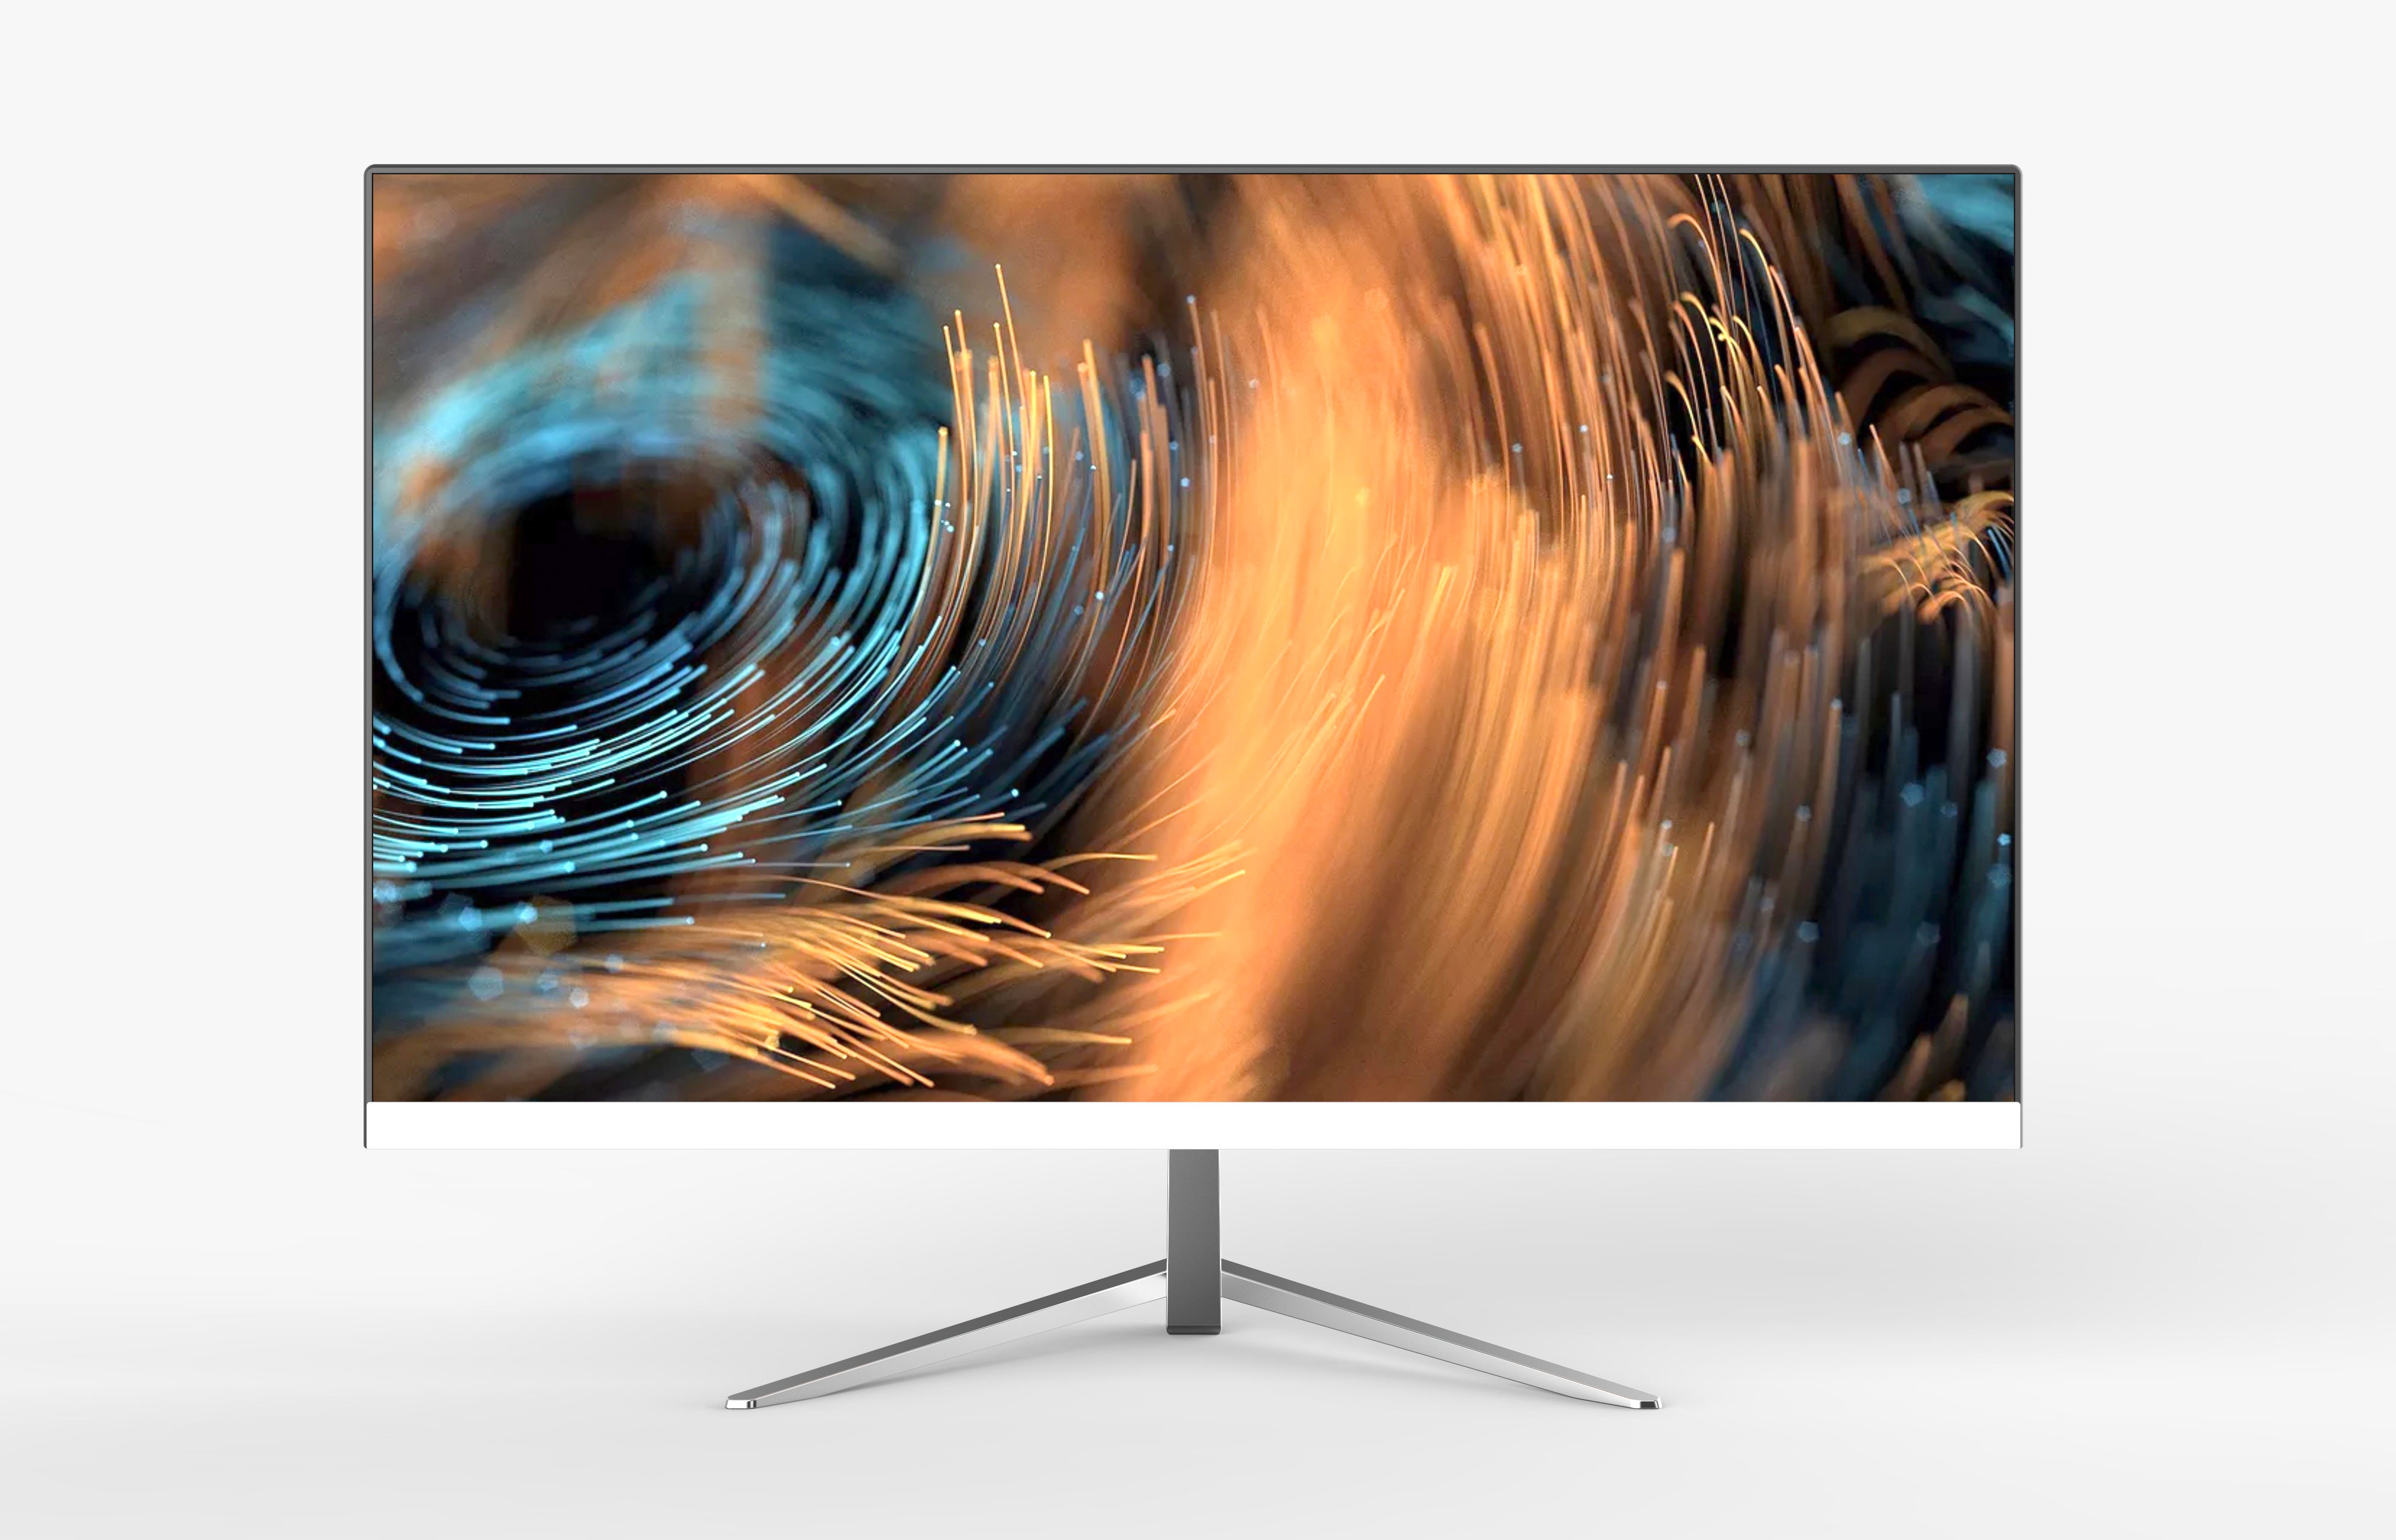 Perfect Display’s high refresh rate gaming monitor receives high praise